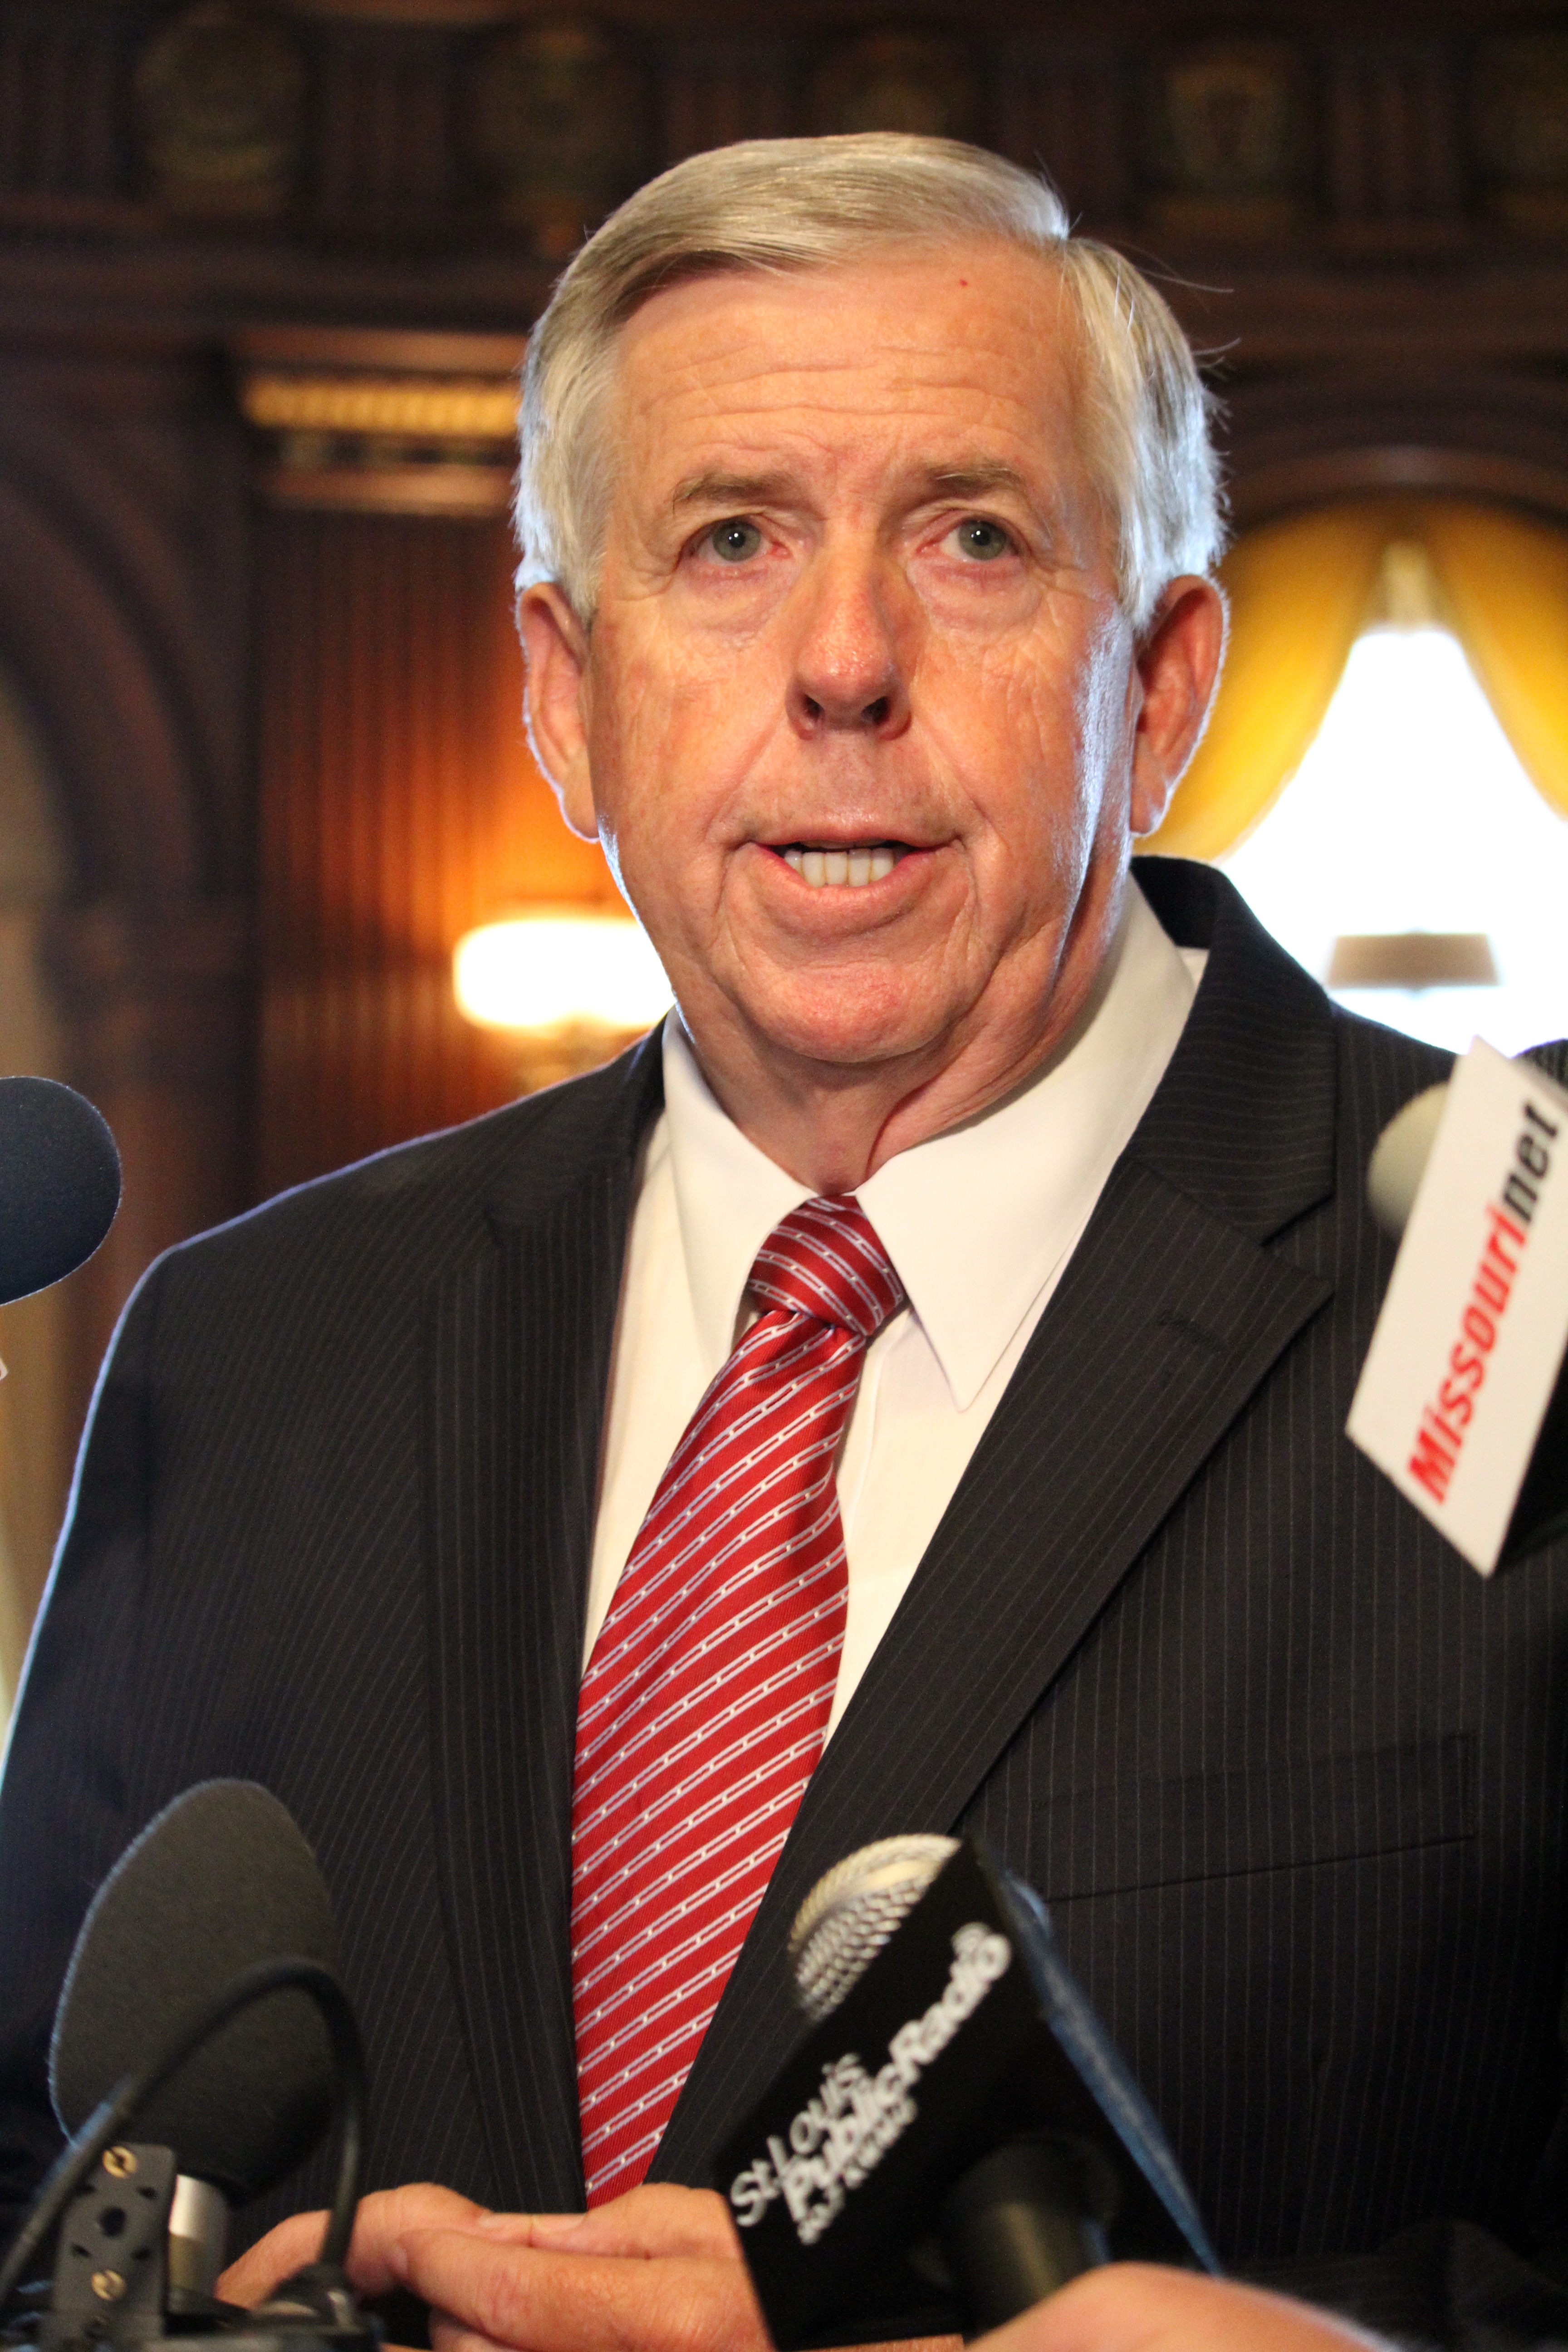 Gov. Mike Parson takes questions from the media before a Cabinet meeting on June 4, 2018. (ALISHA SHURR/THE MISSOURI TIMES).